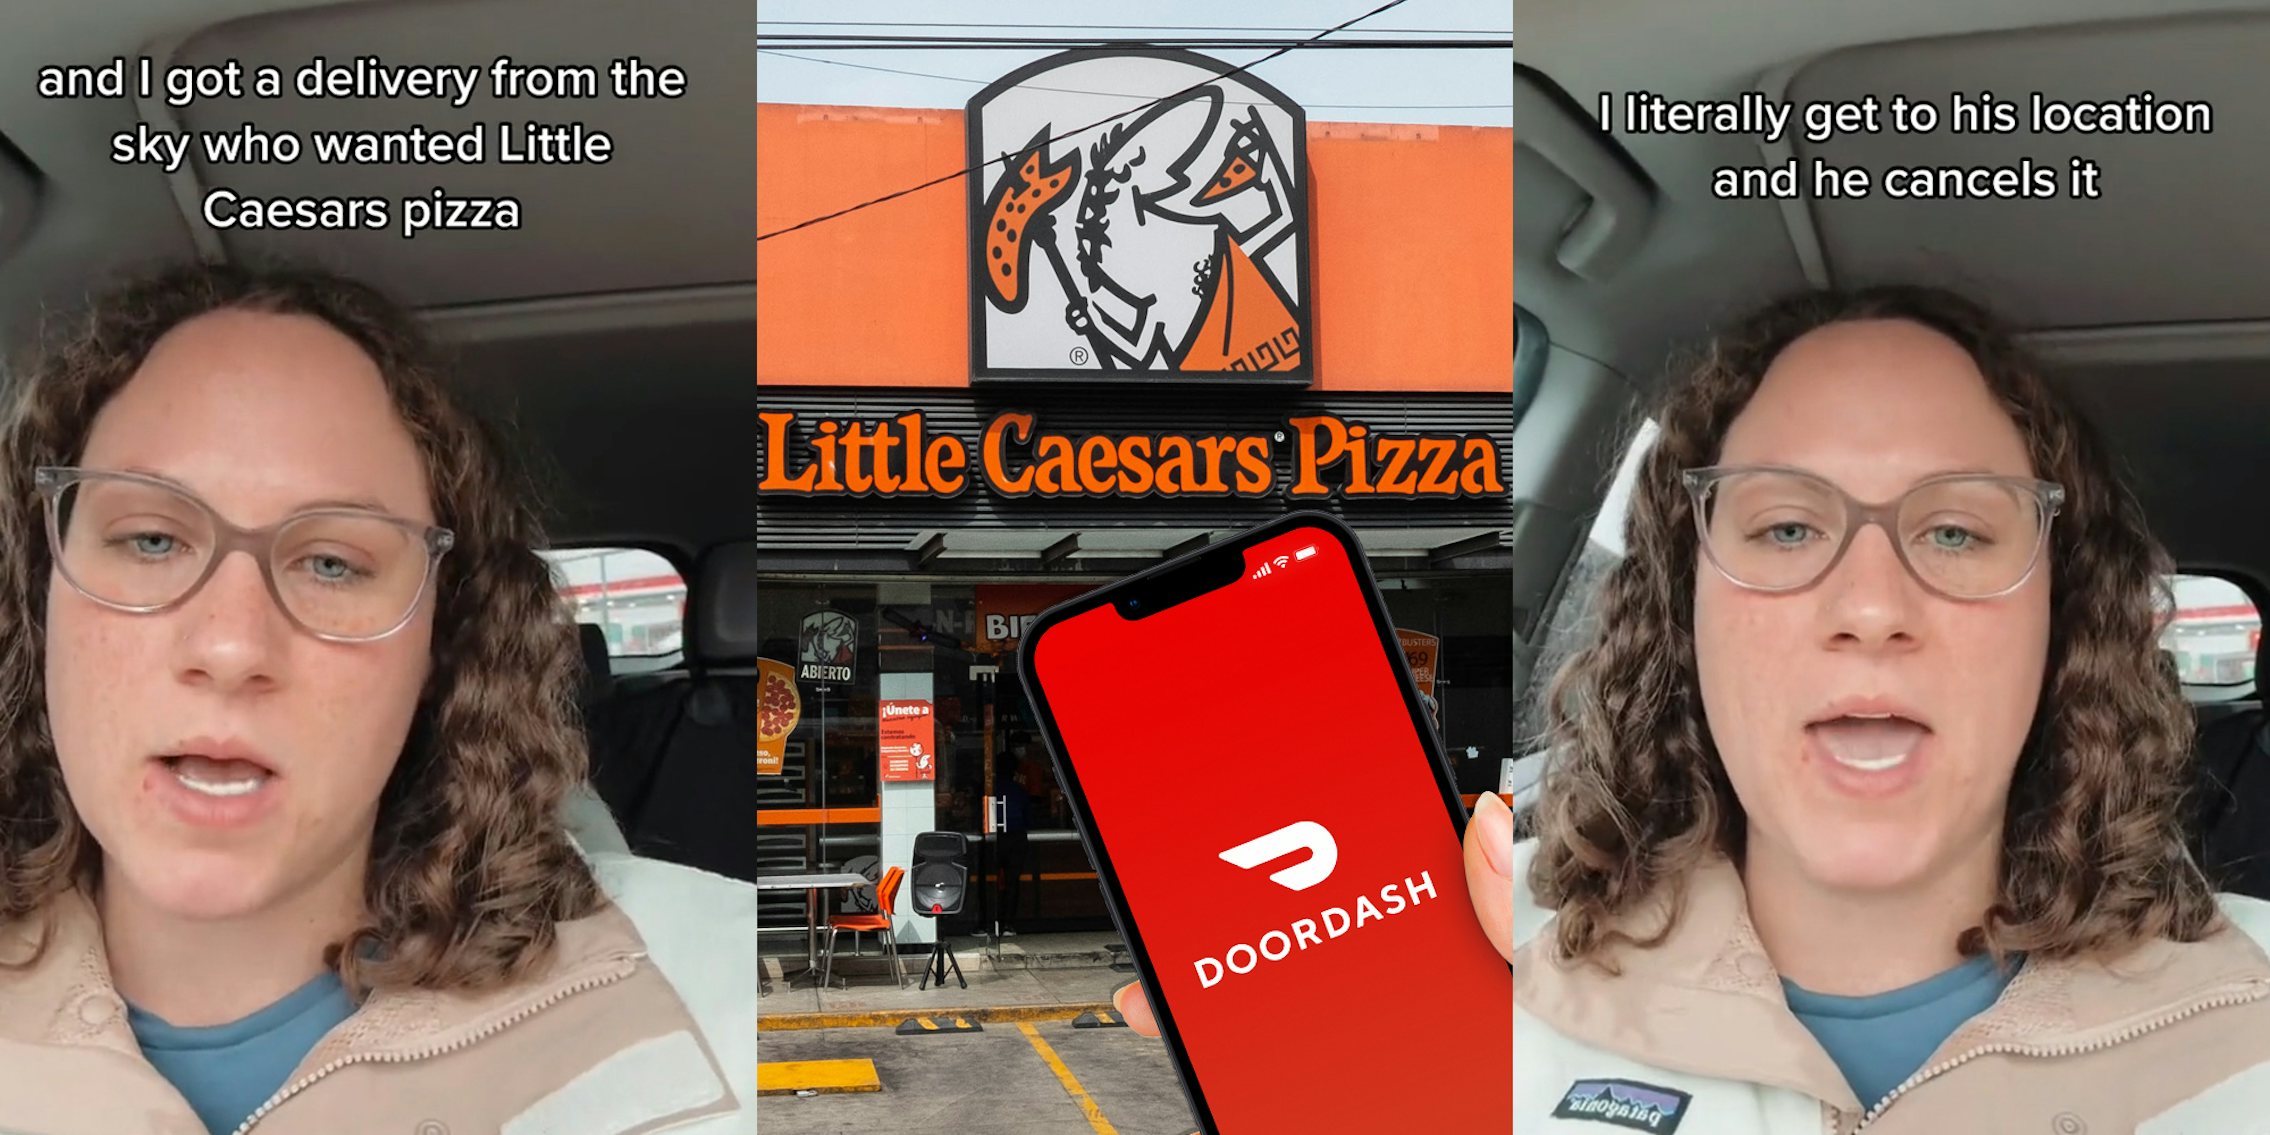 DoorDash driver speaking in car caption and I got a delivery from this guy who wanted Little Caesars pizza' (l) hand holding phone with DoorDash on screen in front f Little Caesars building (c) DoorDash driver speaking in car caption 'I literally get to his location and he cancels it' (r)